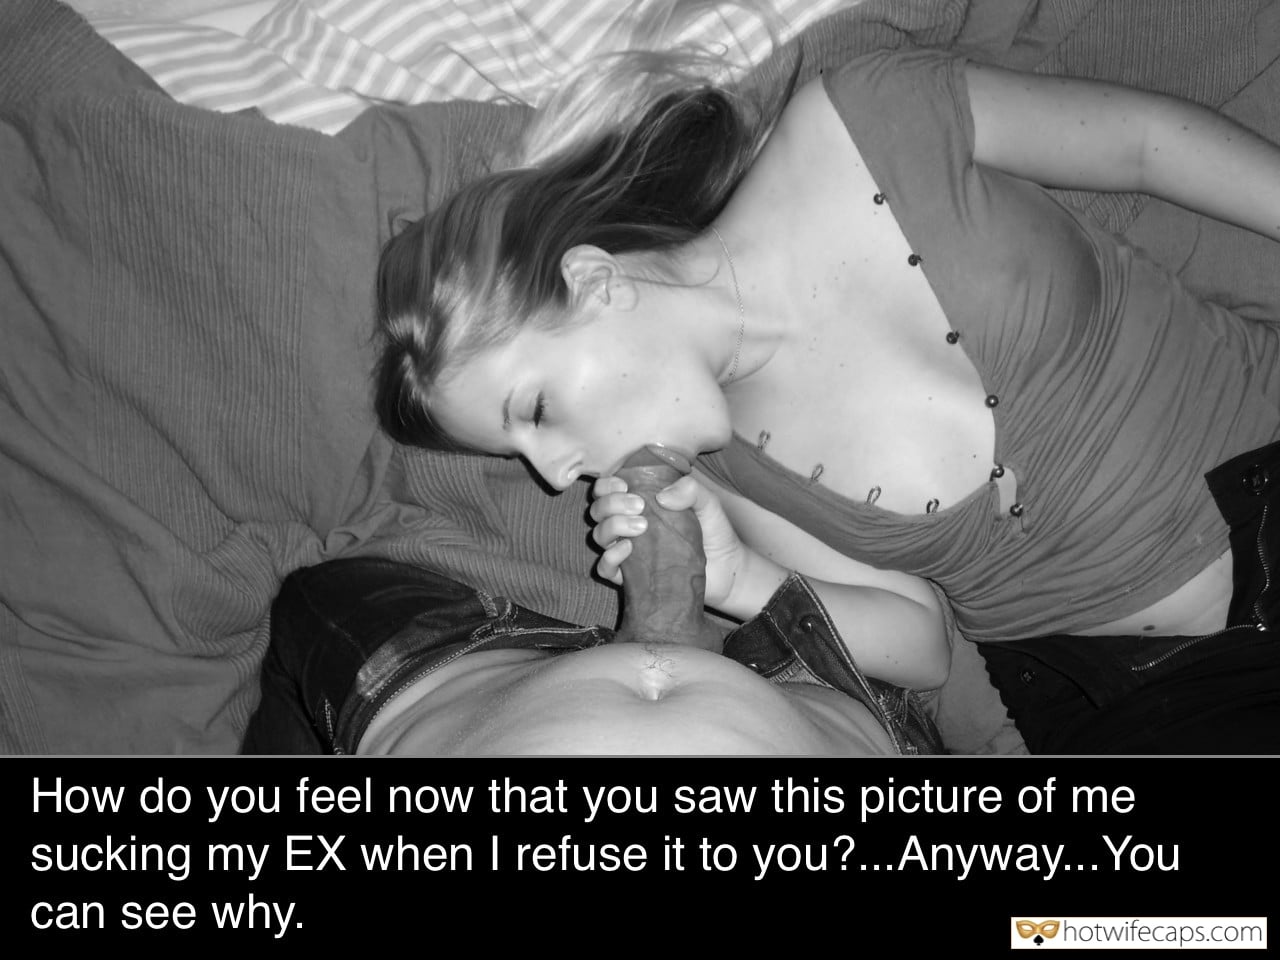 It's too big Ex Boyfriend Blowjob Bigger Cock hotwife caption: How do you feel now that you saw this picture of me sucking my EX when I refuse it to you?… Anyway… You can see why. bigger ex sex captions Thick Cock of Her Ex in Your Wive’s Mouth